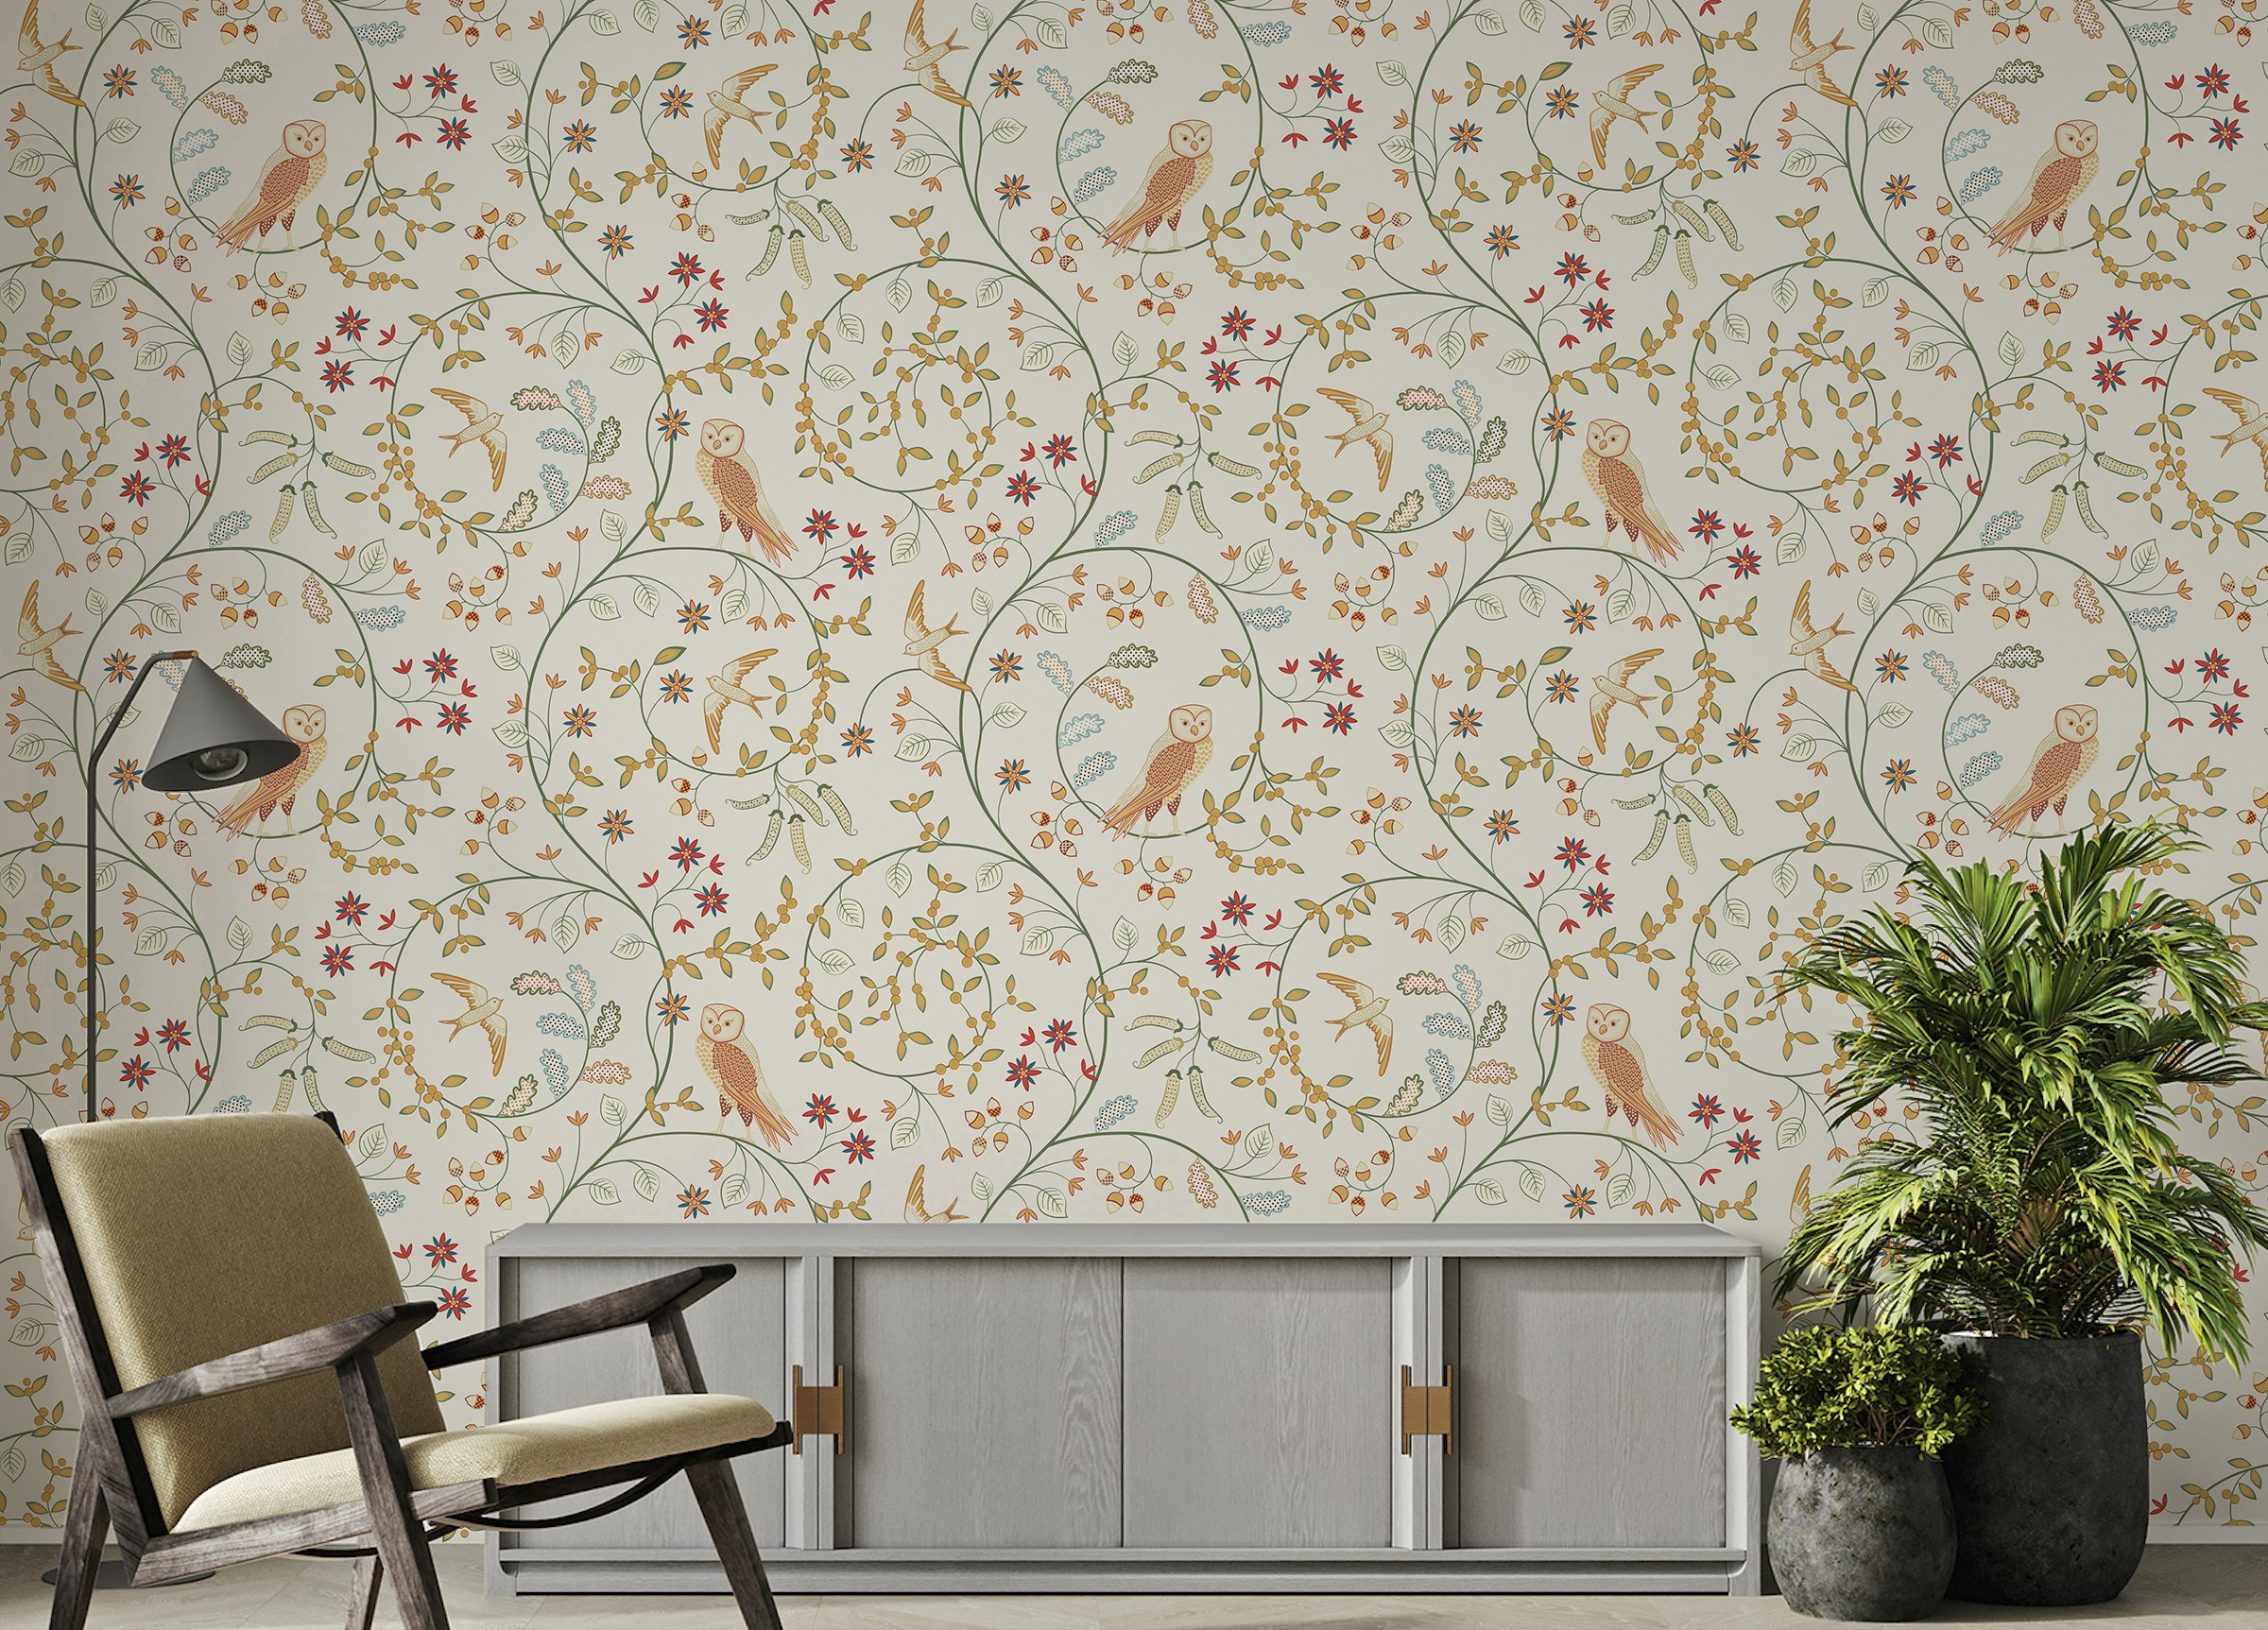 Peel and Stick Newill Peppermint Russet Flower Wallpaper For Walls